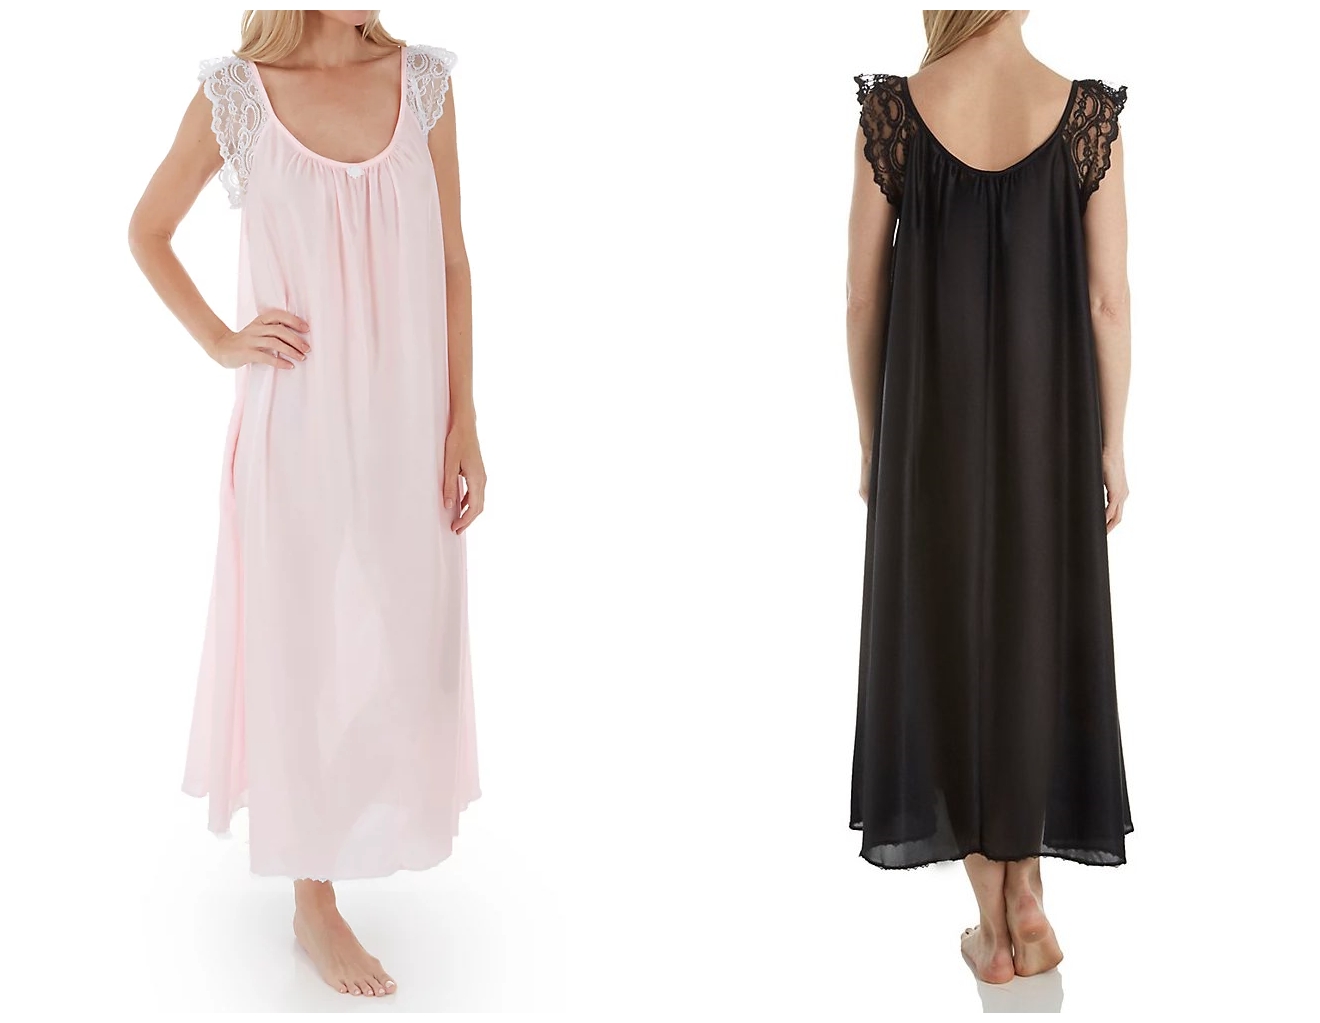 Nightgowns plus in lovely lightweight satin are so pretty and feminine!